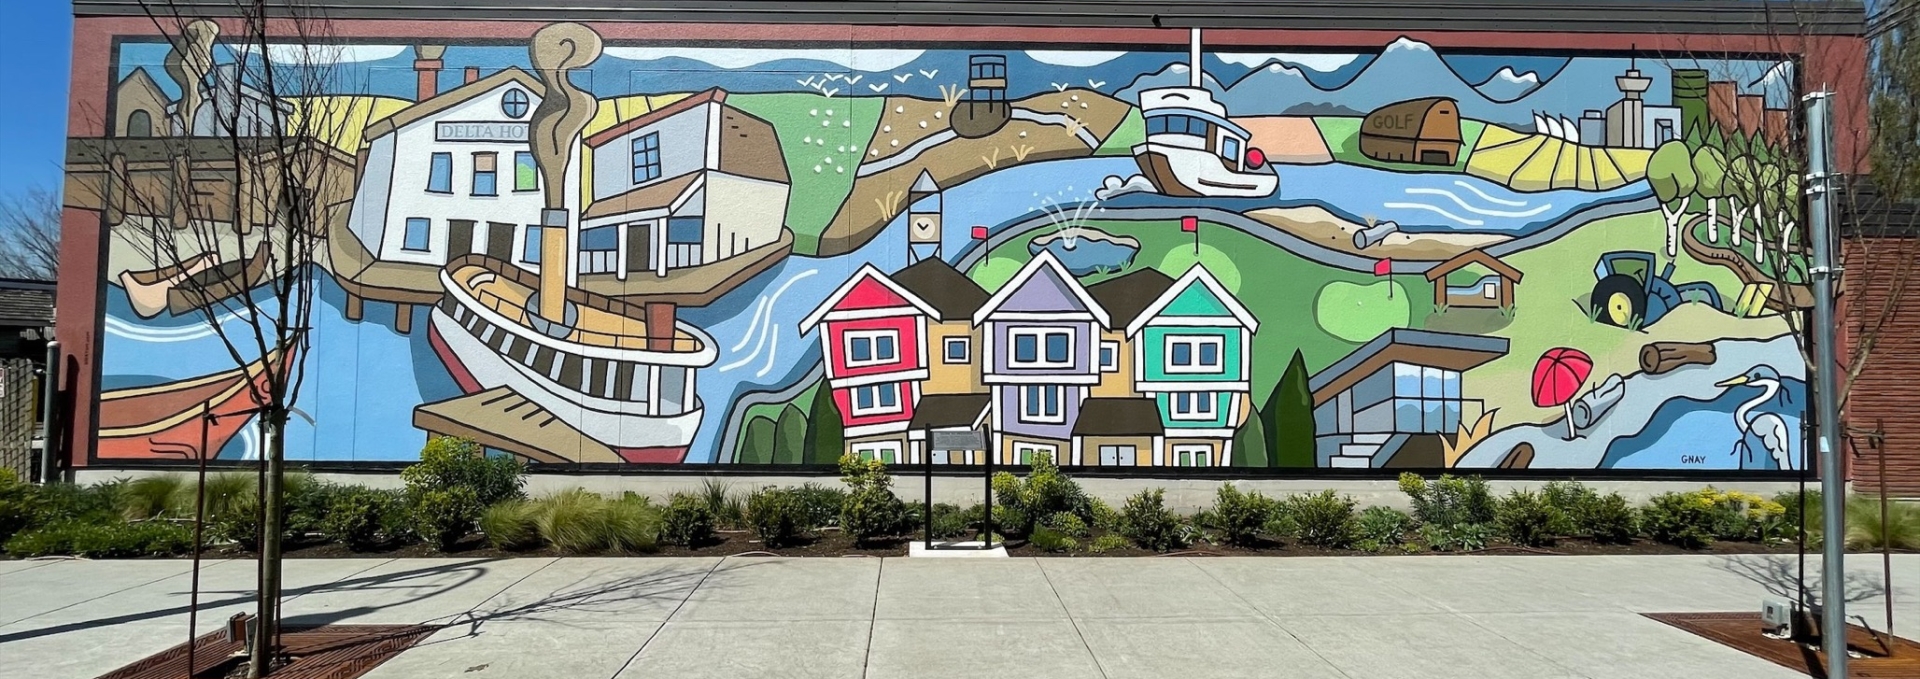 Ladner Mural by Gary Nay